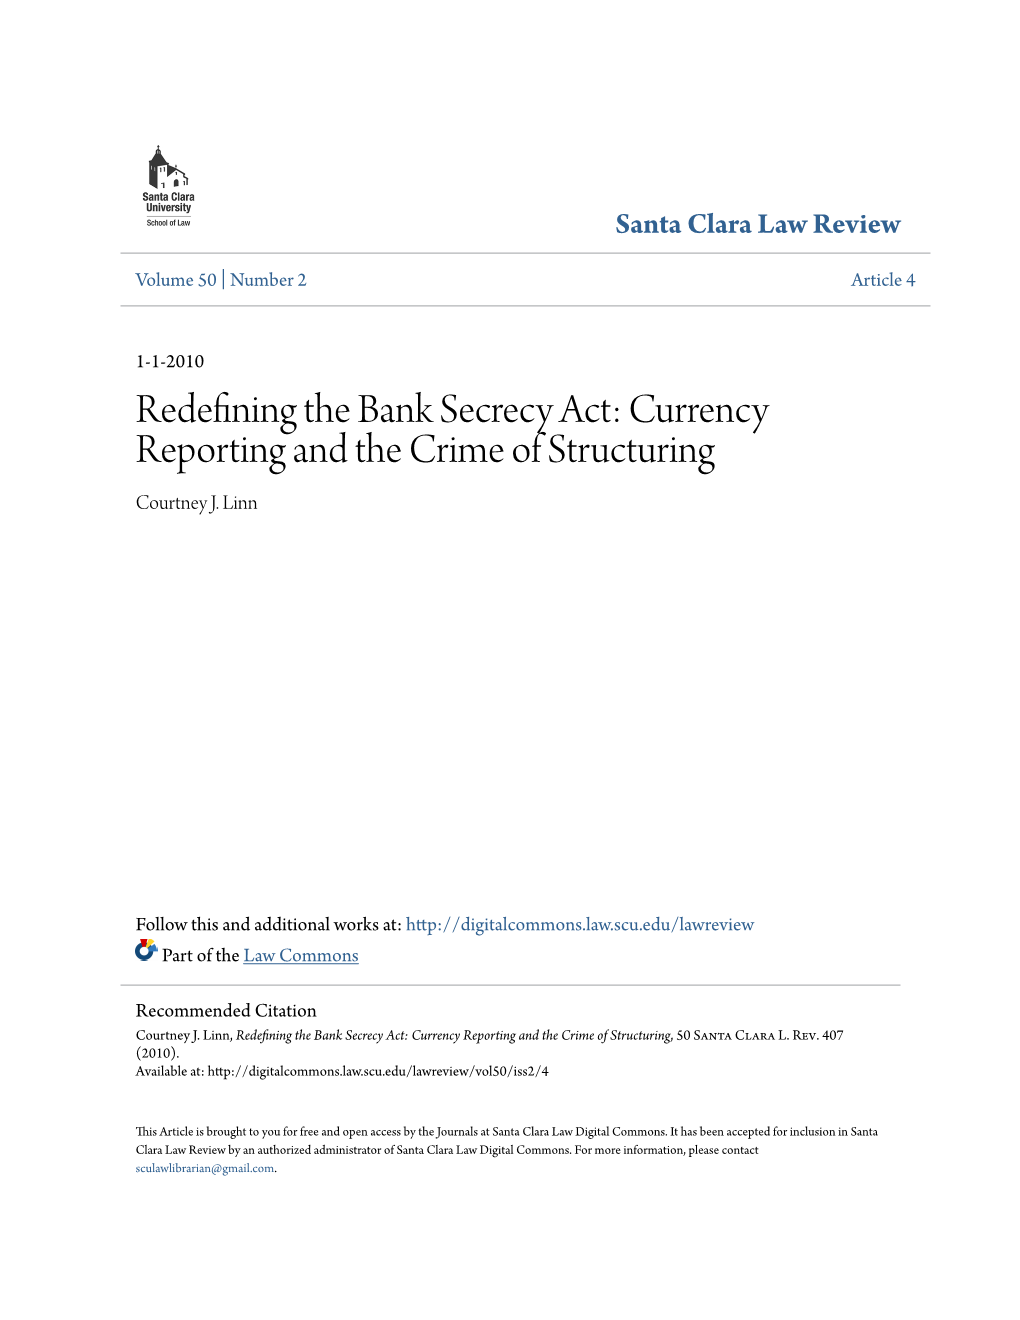 Redefining the Bank Secrecy Act: Currency Reporting and the Crime of Structuring Courtney J